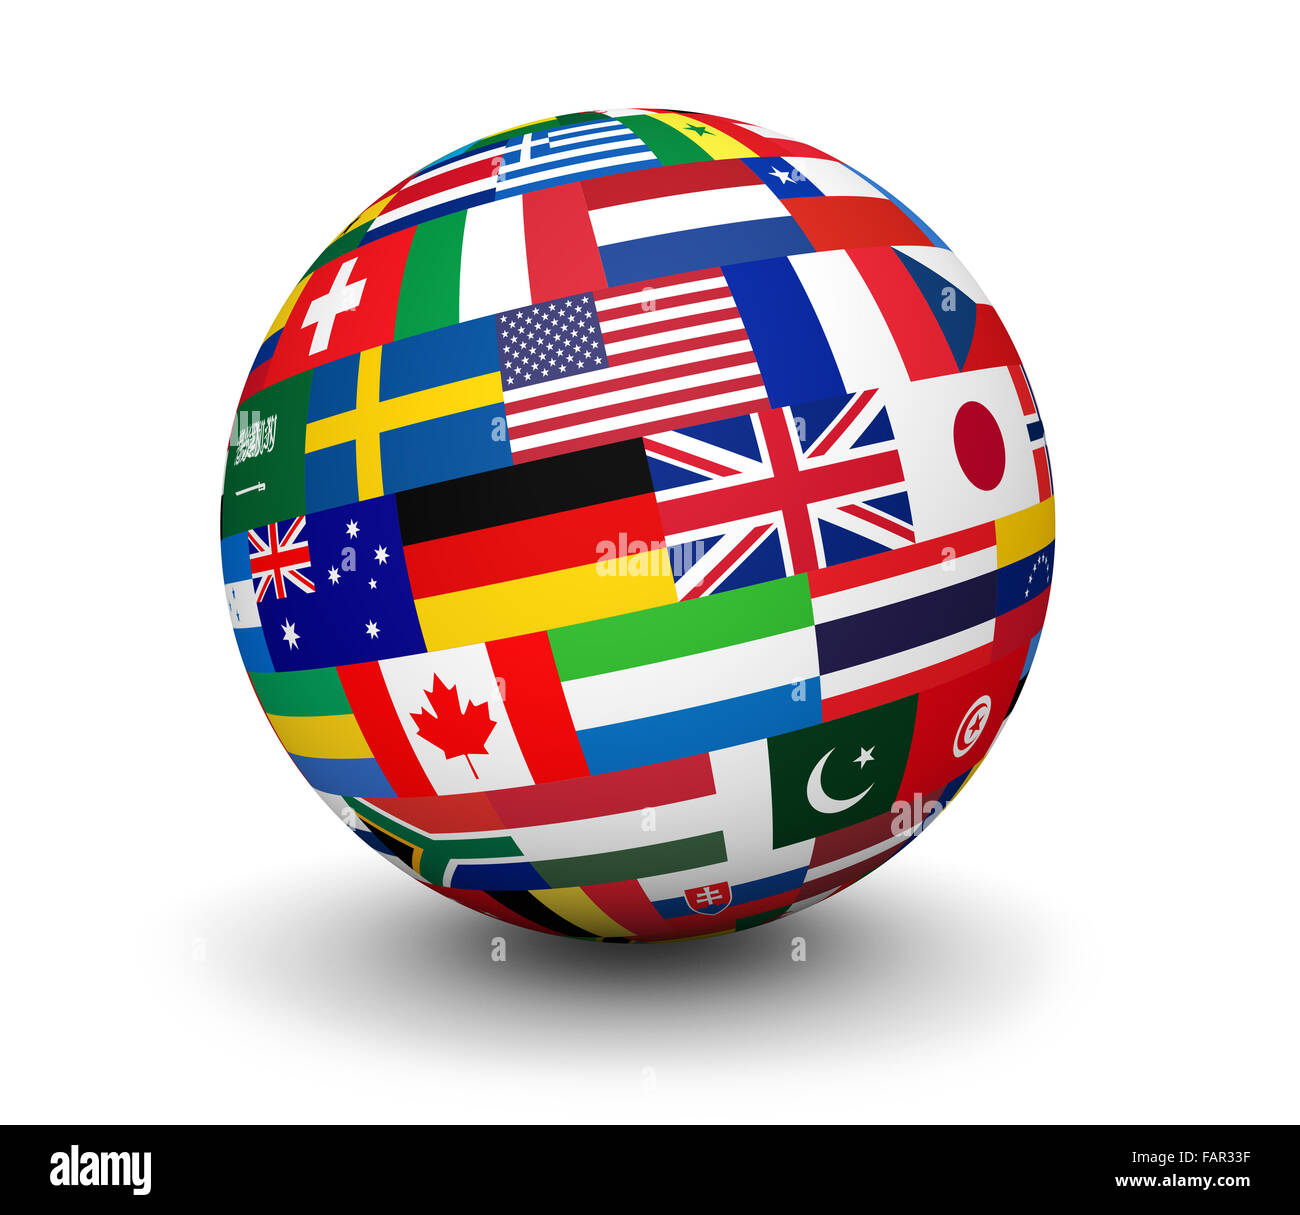 International business, travel services and global management concept with a globe and international flags of the world. Stock Photo